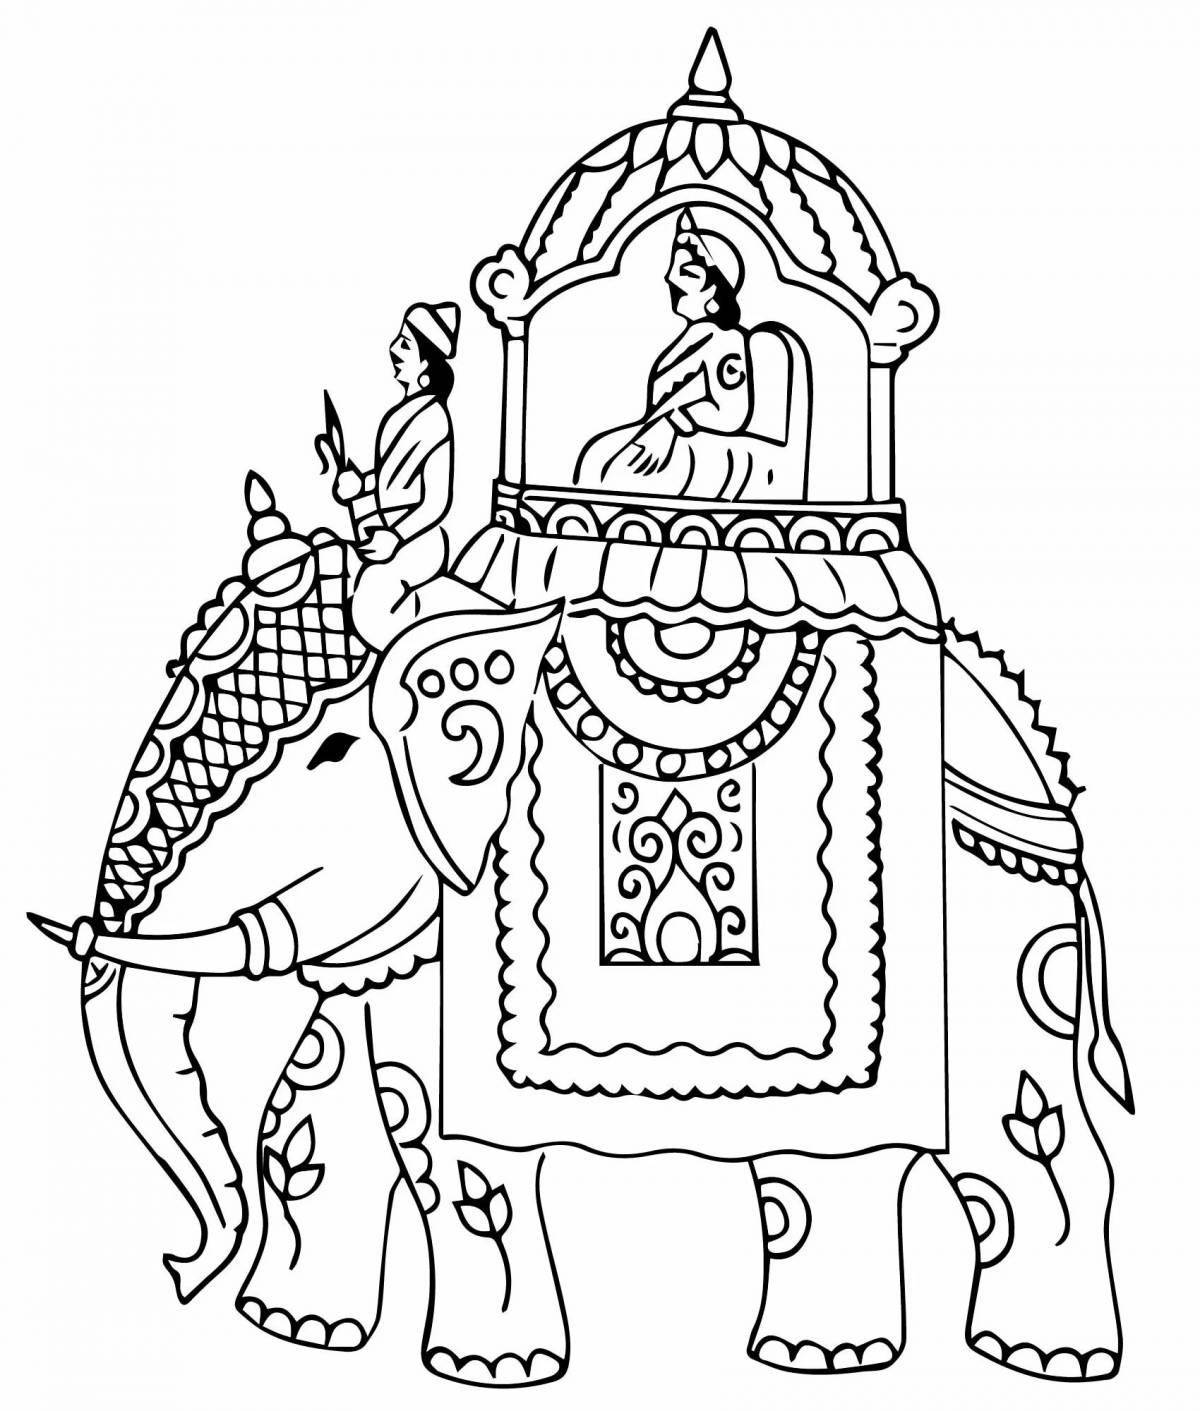 Great Indian elephant coloring book for kids